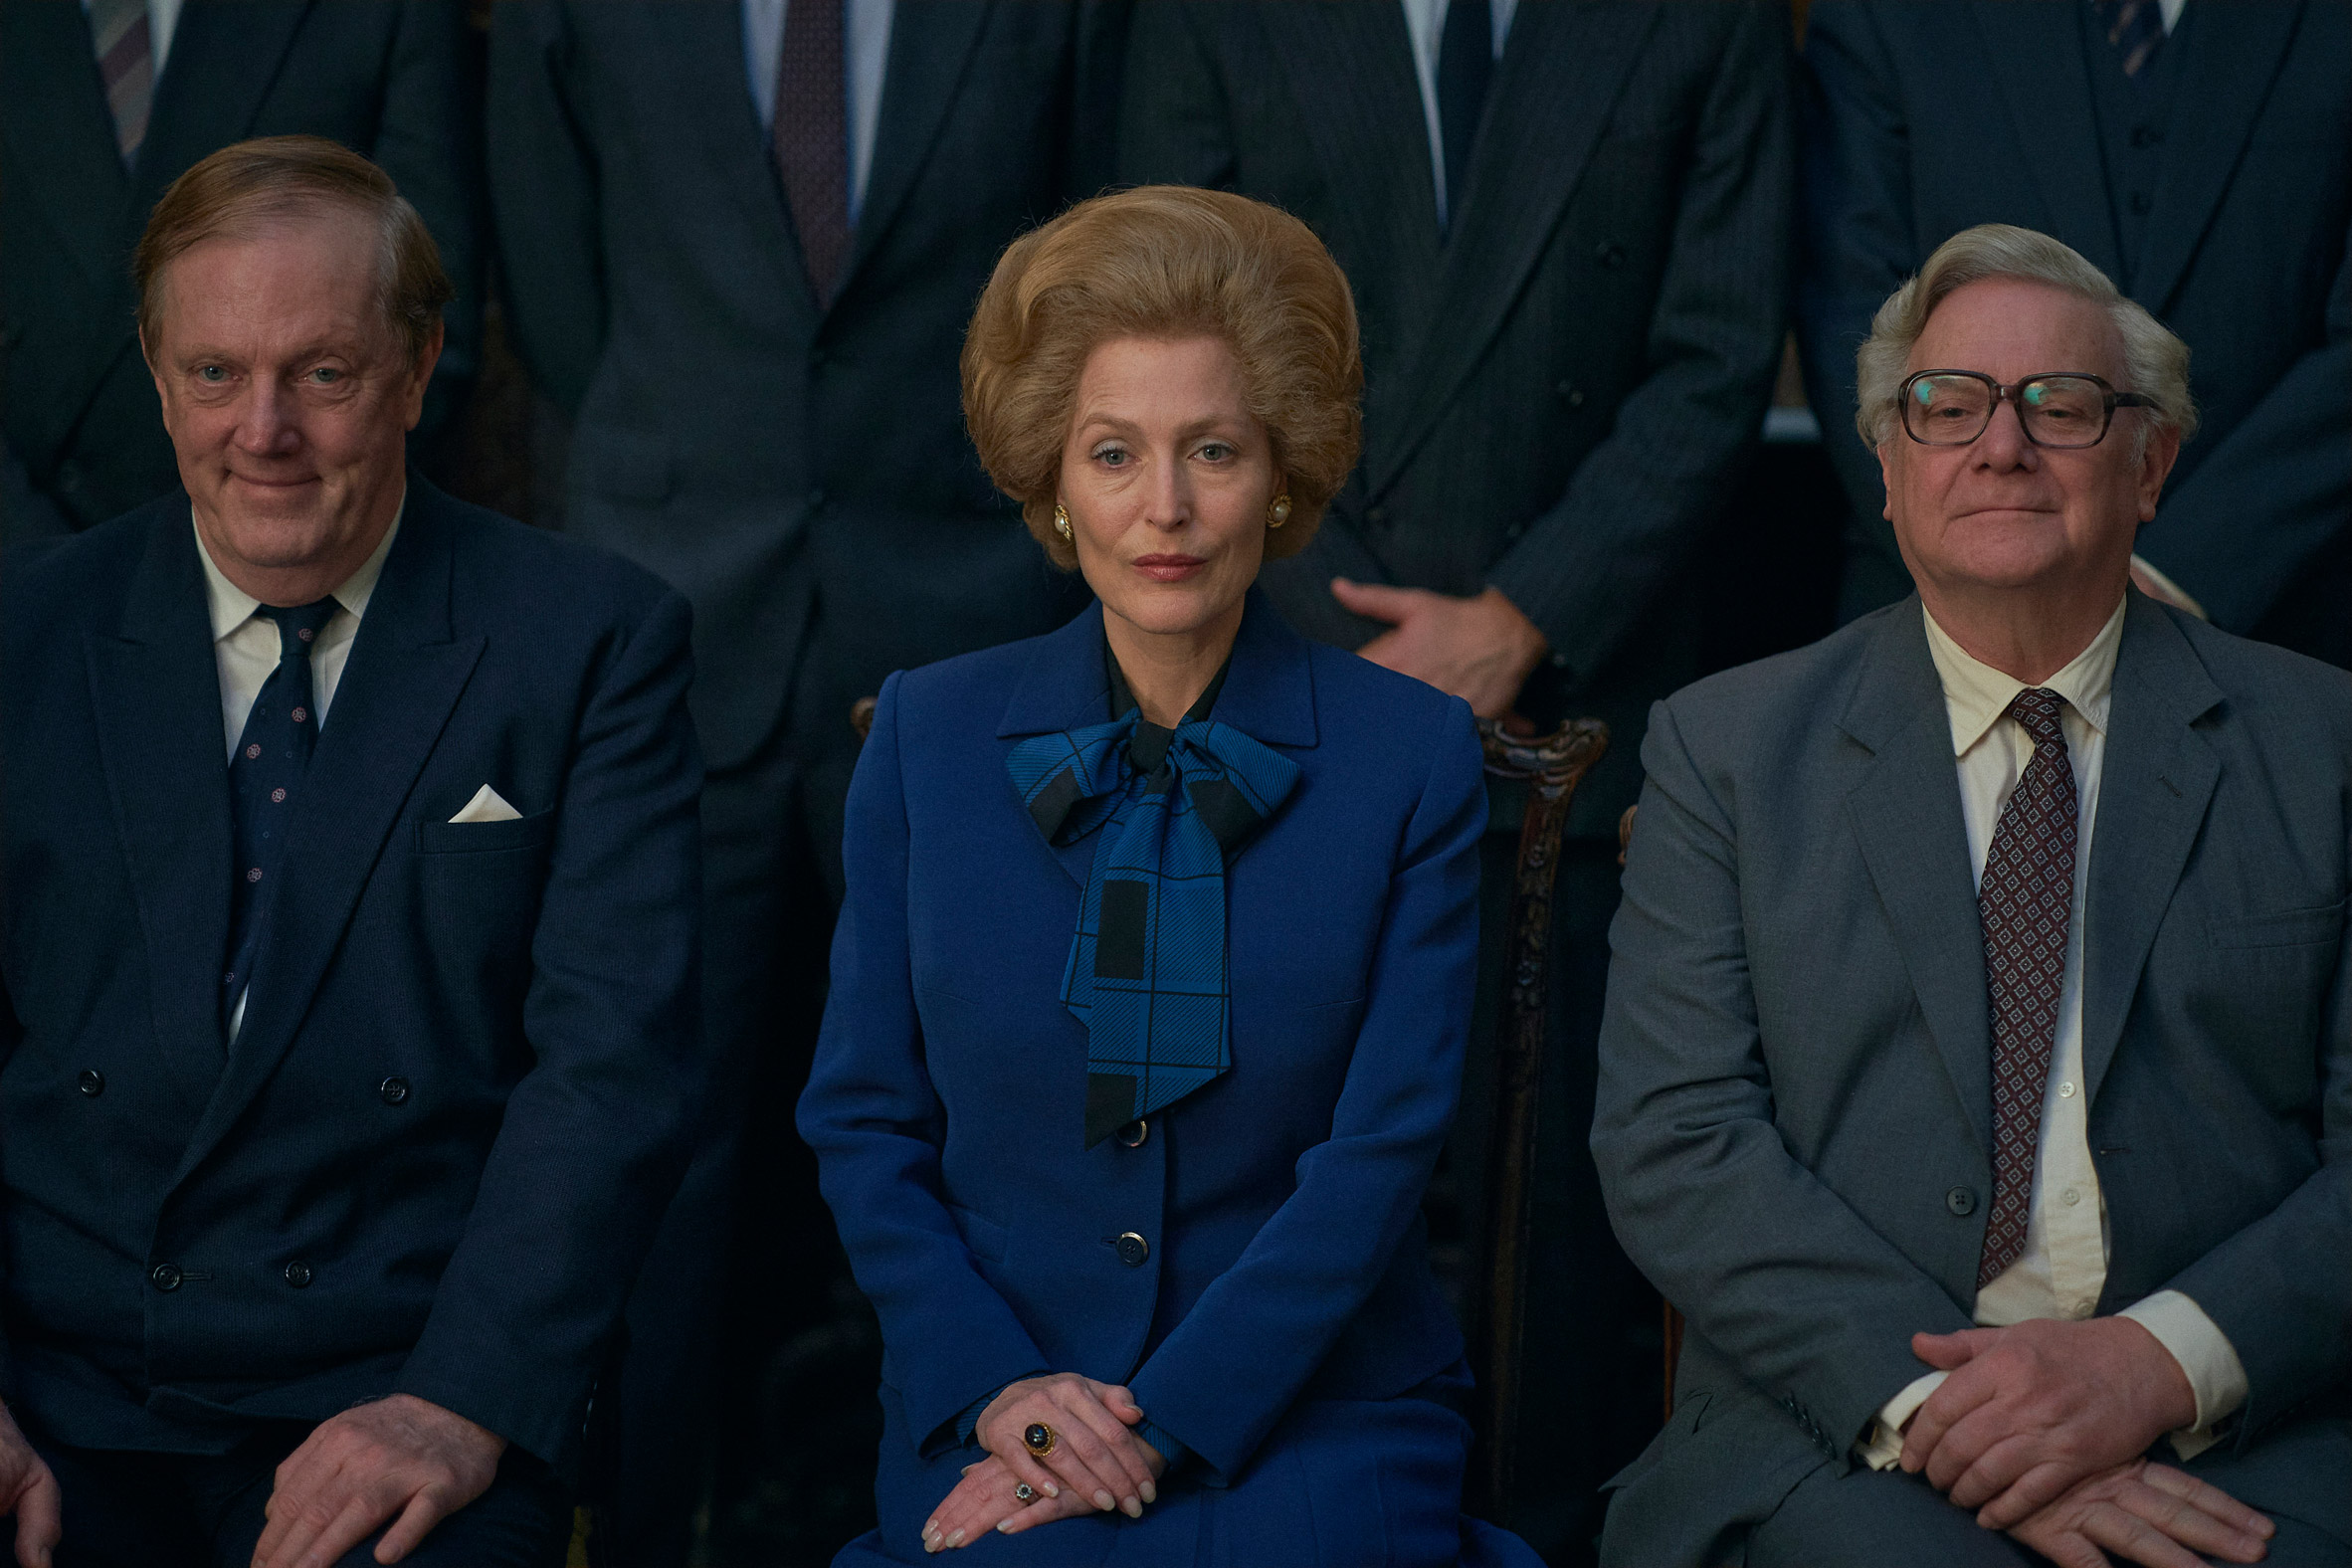 Gillian Anderson as Margaret Thatcher in The Crown season 4